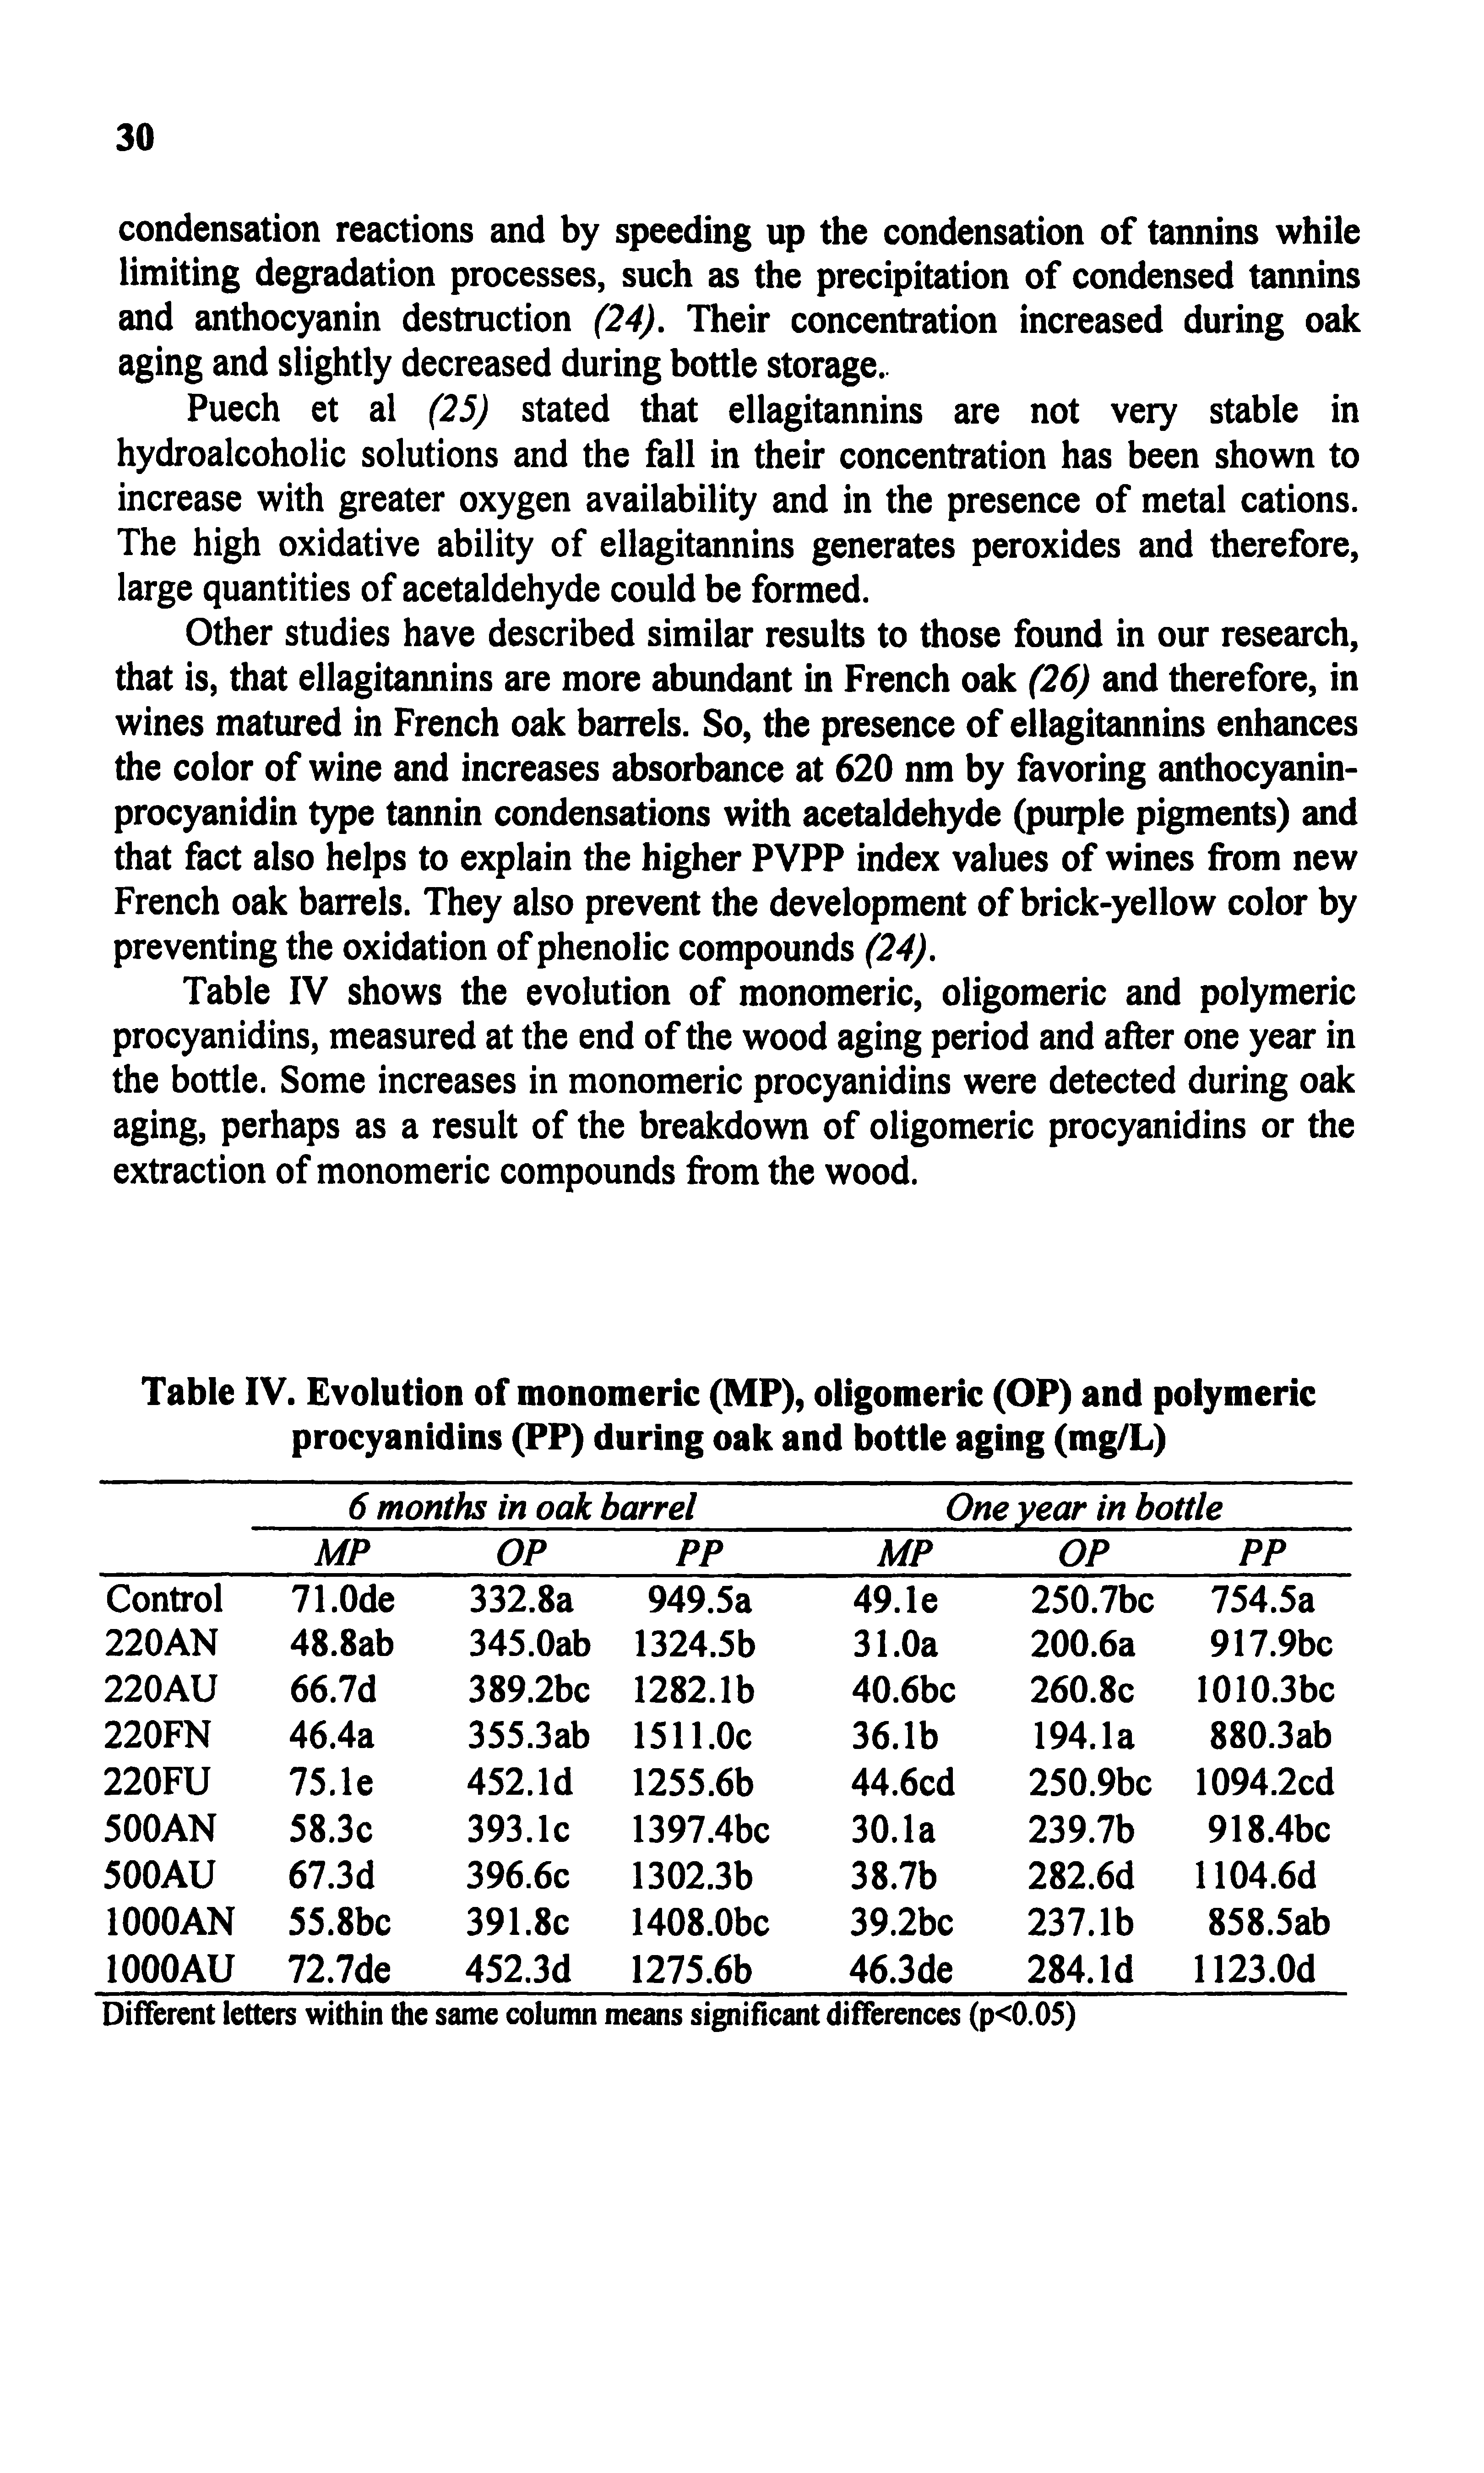 Table IV shows the evolution of monomeric, oligomeric and polymeric procyanidins, measured at the end of the wood aging period and after one year in the bottle. Some increases in monomeric procyanidins were detected during oak aging, perhaps as a result of the breakdown of oligomeric procyanidins or the extraction of monomeric compounds from the wood.